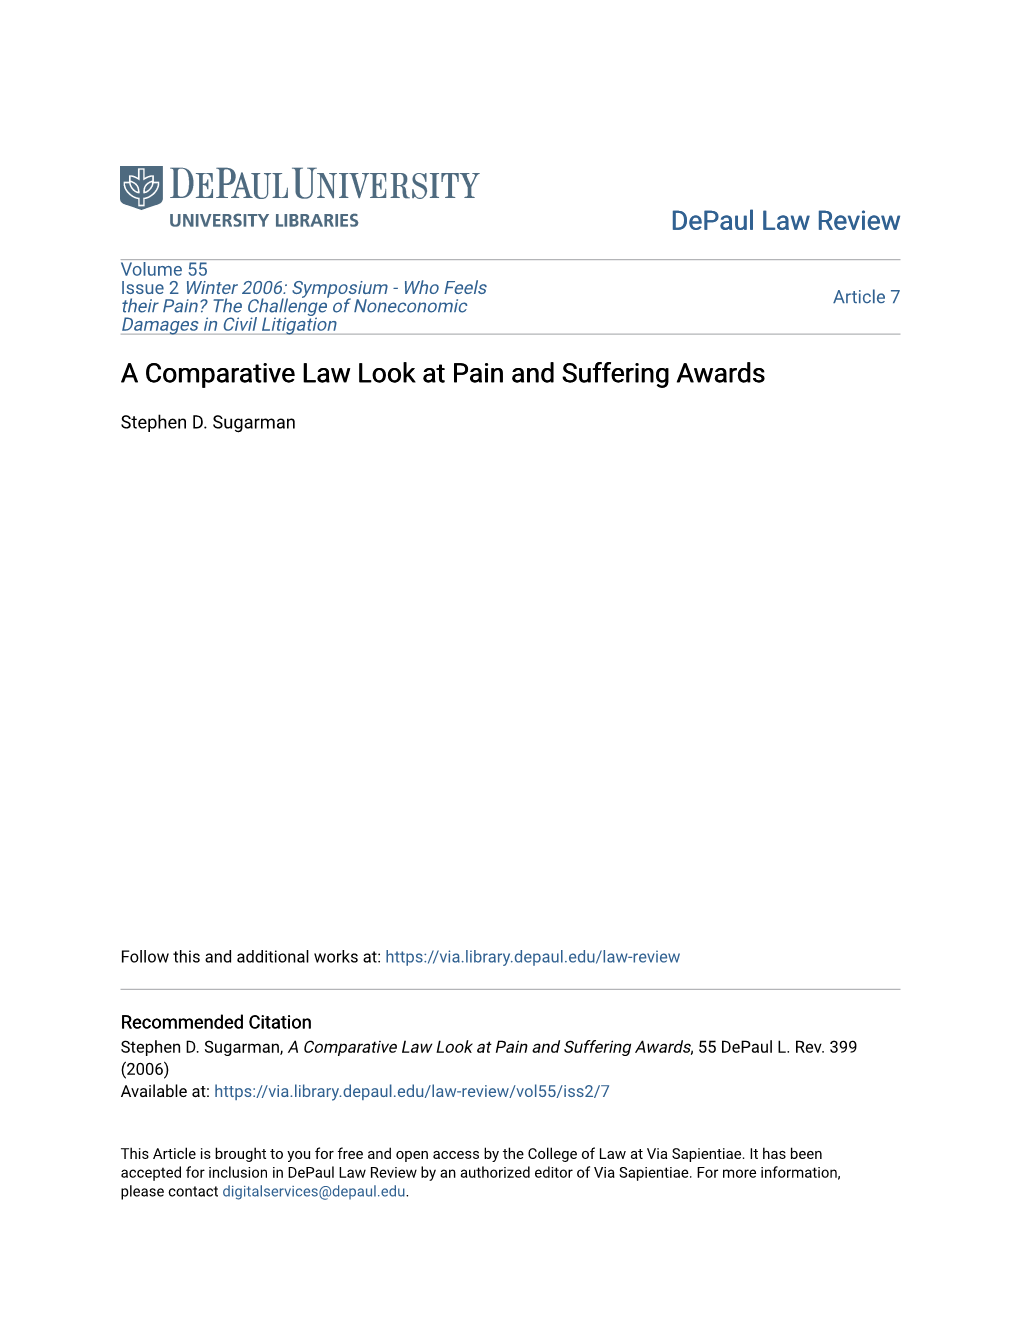 A Comparative Law Look at Pain and Suffering Awards